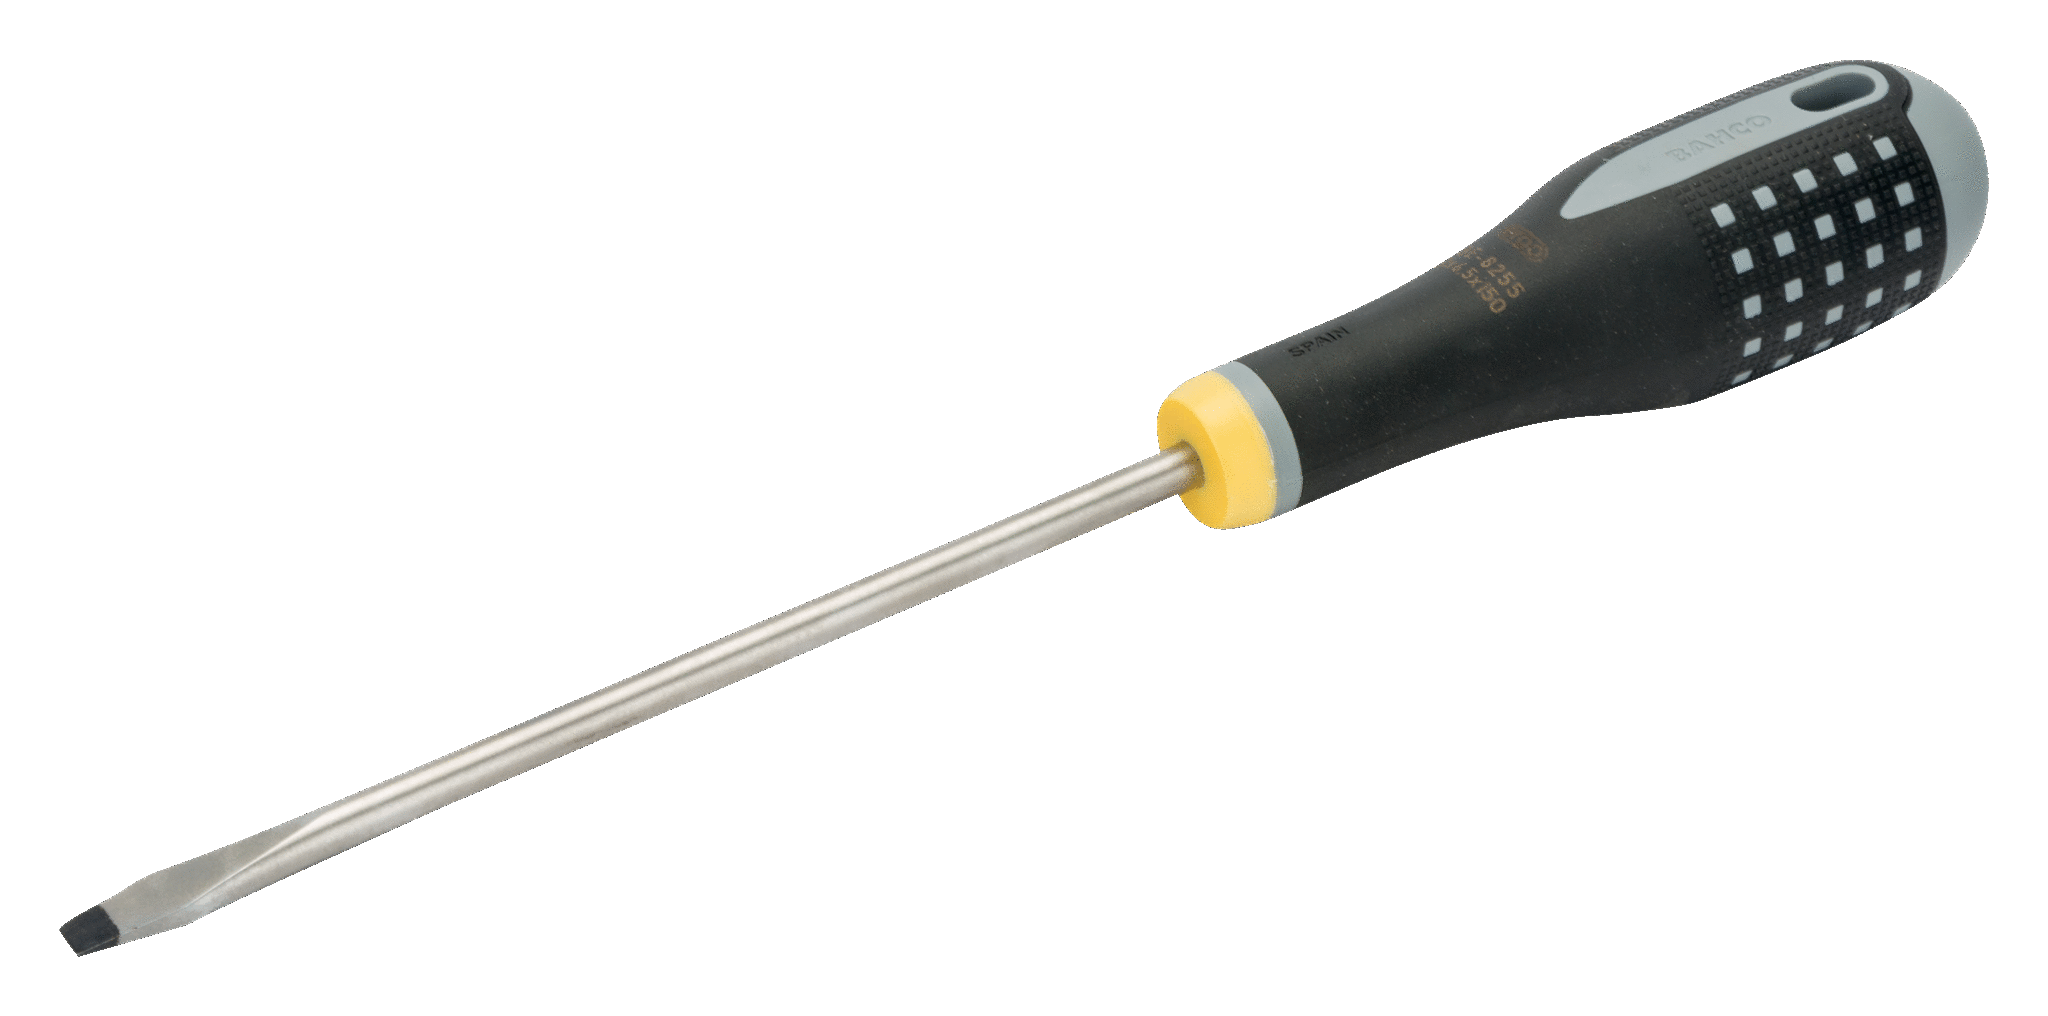 BAHCO BHFF1A1010 T-Handle Screwdrivers 3/3